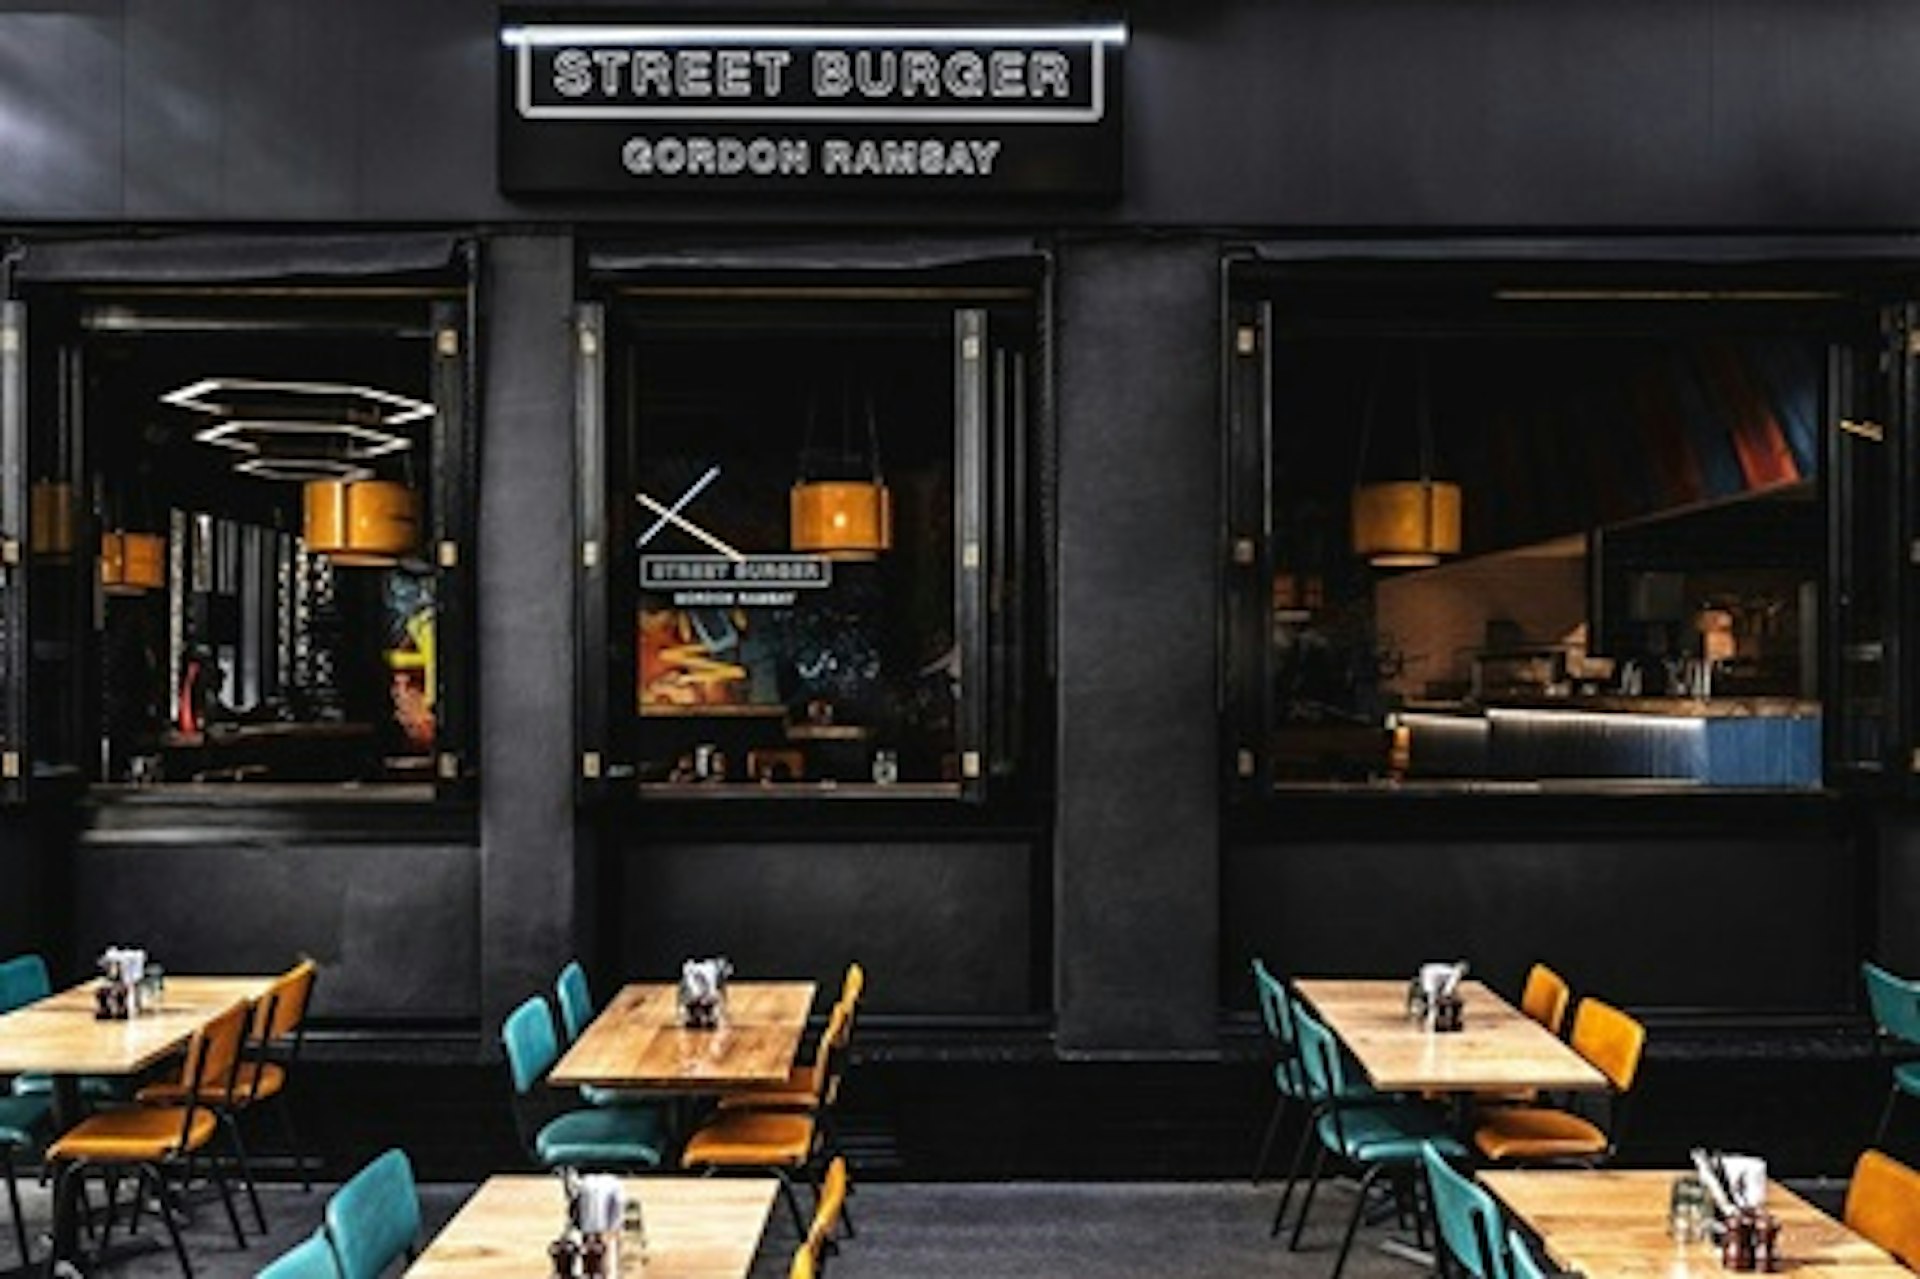 Burger, Fries and Unlimited Soft Drink for Two at Gordon Ramsay's Street Burger 2